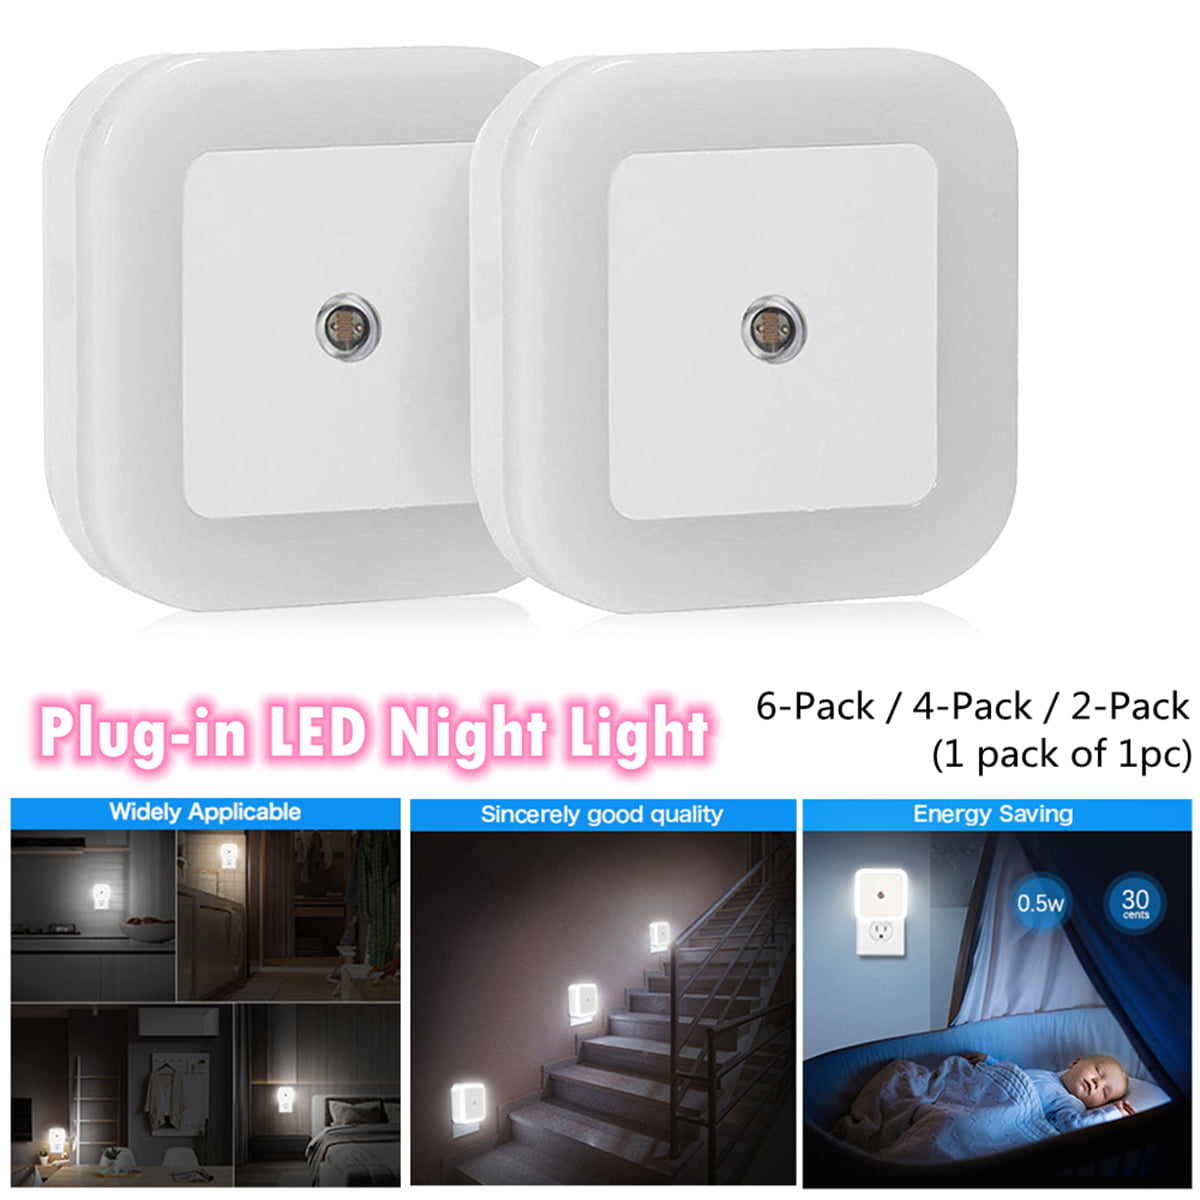 6-Pack Plug-in LED Night Light Lamp with Dusk to Dawn Sensor Daylight White 